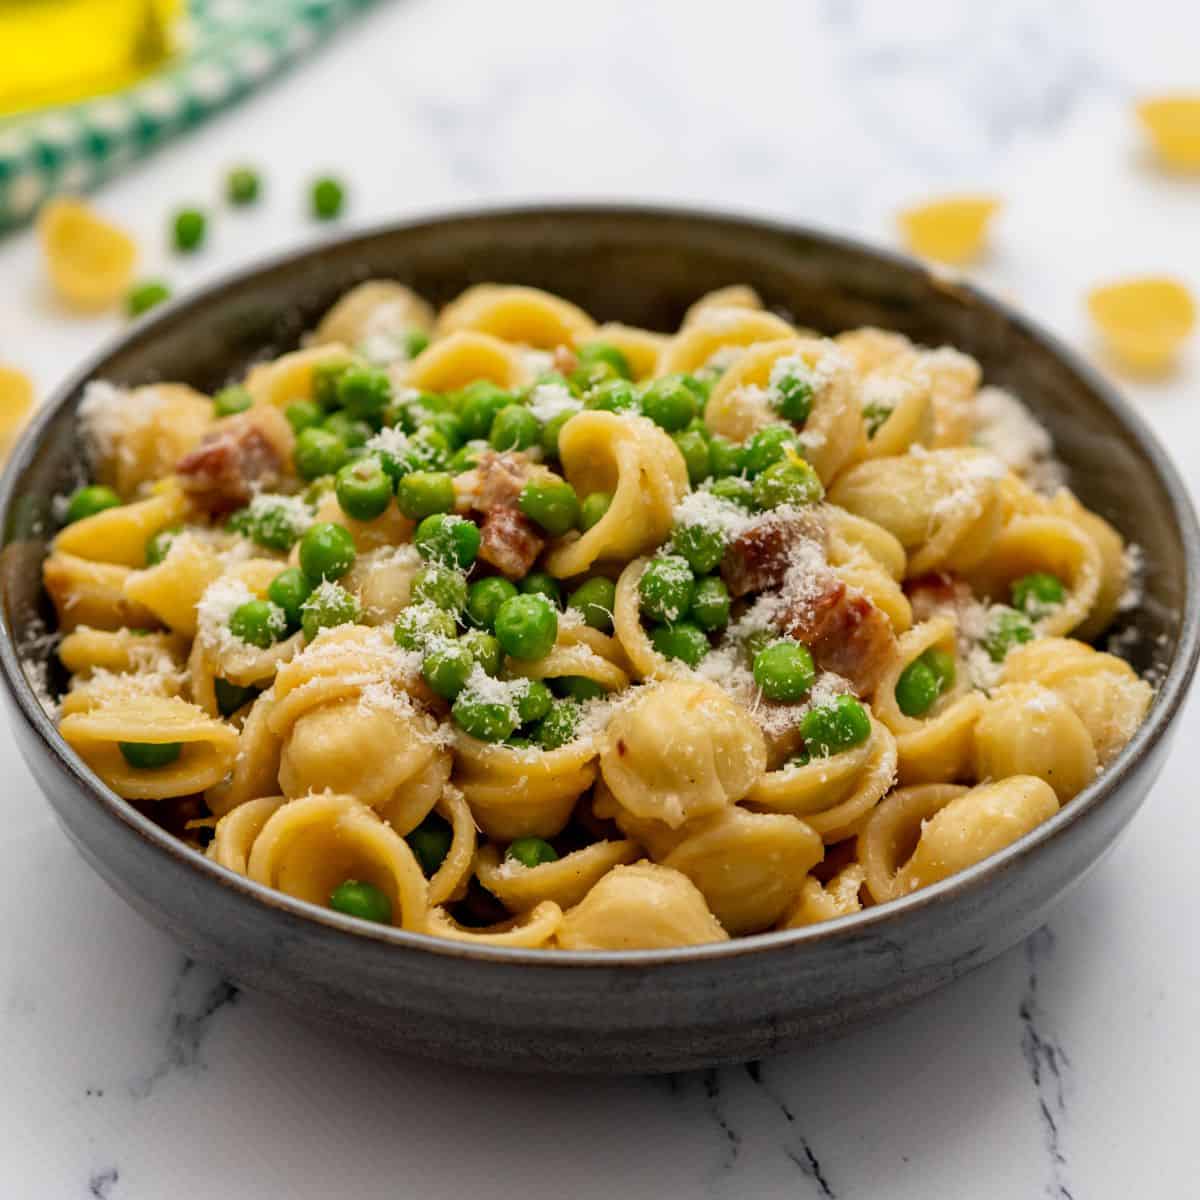 Bowl of pasta with peas, pancetta, and parmesan.